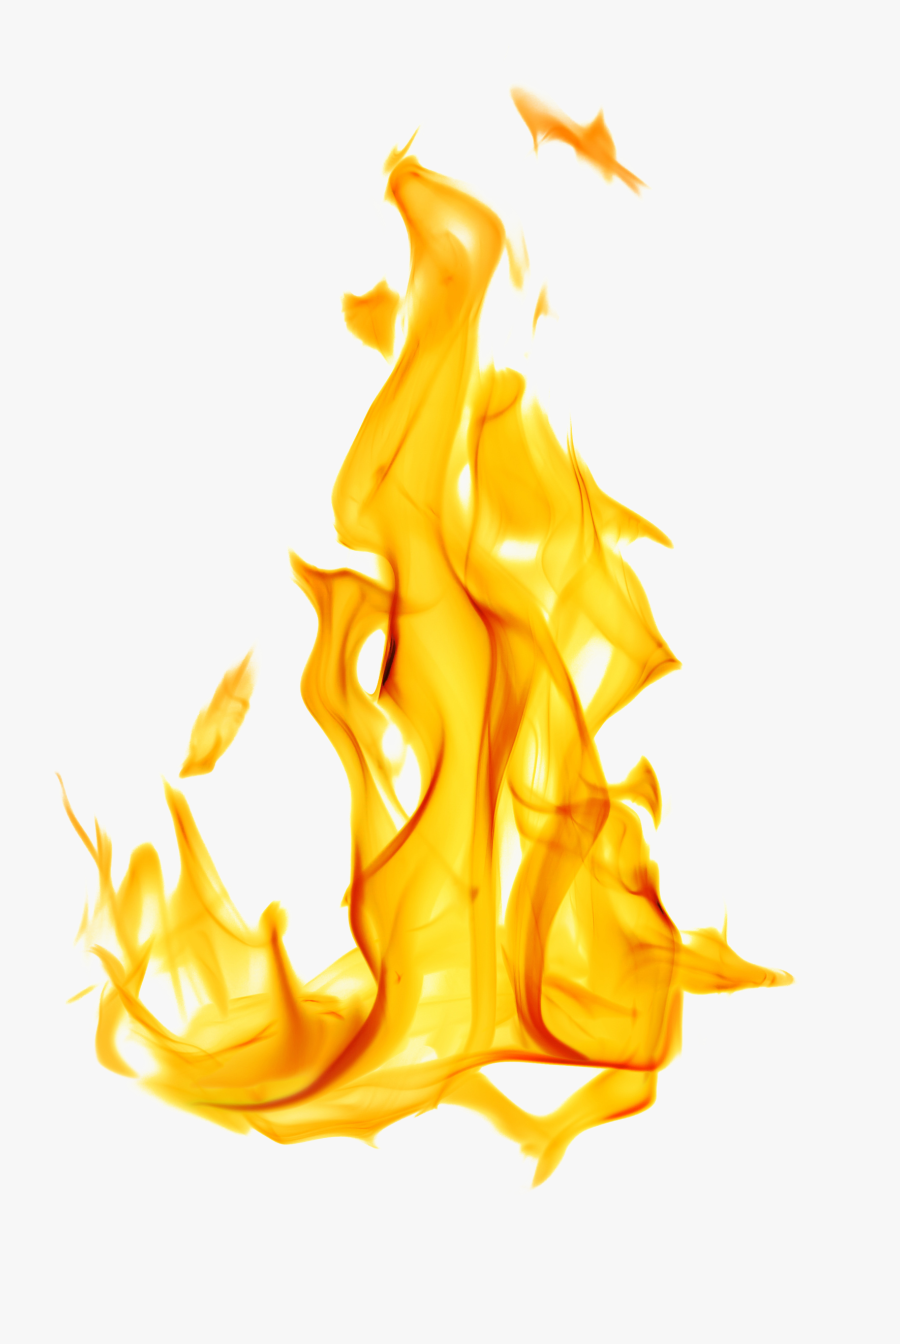 Transparent Realistic Fire Png - Flame With White Background, Transparent Clipart